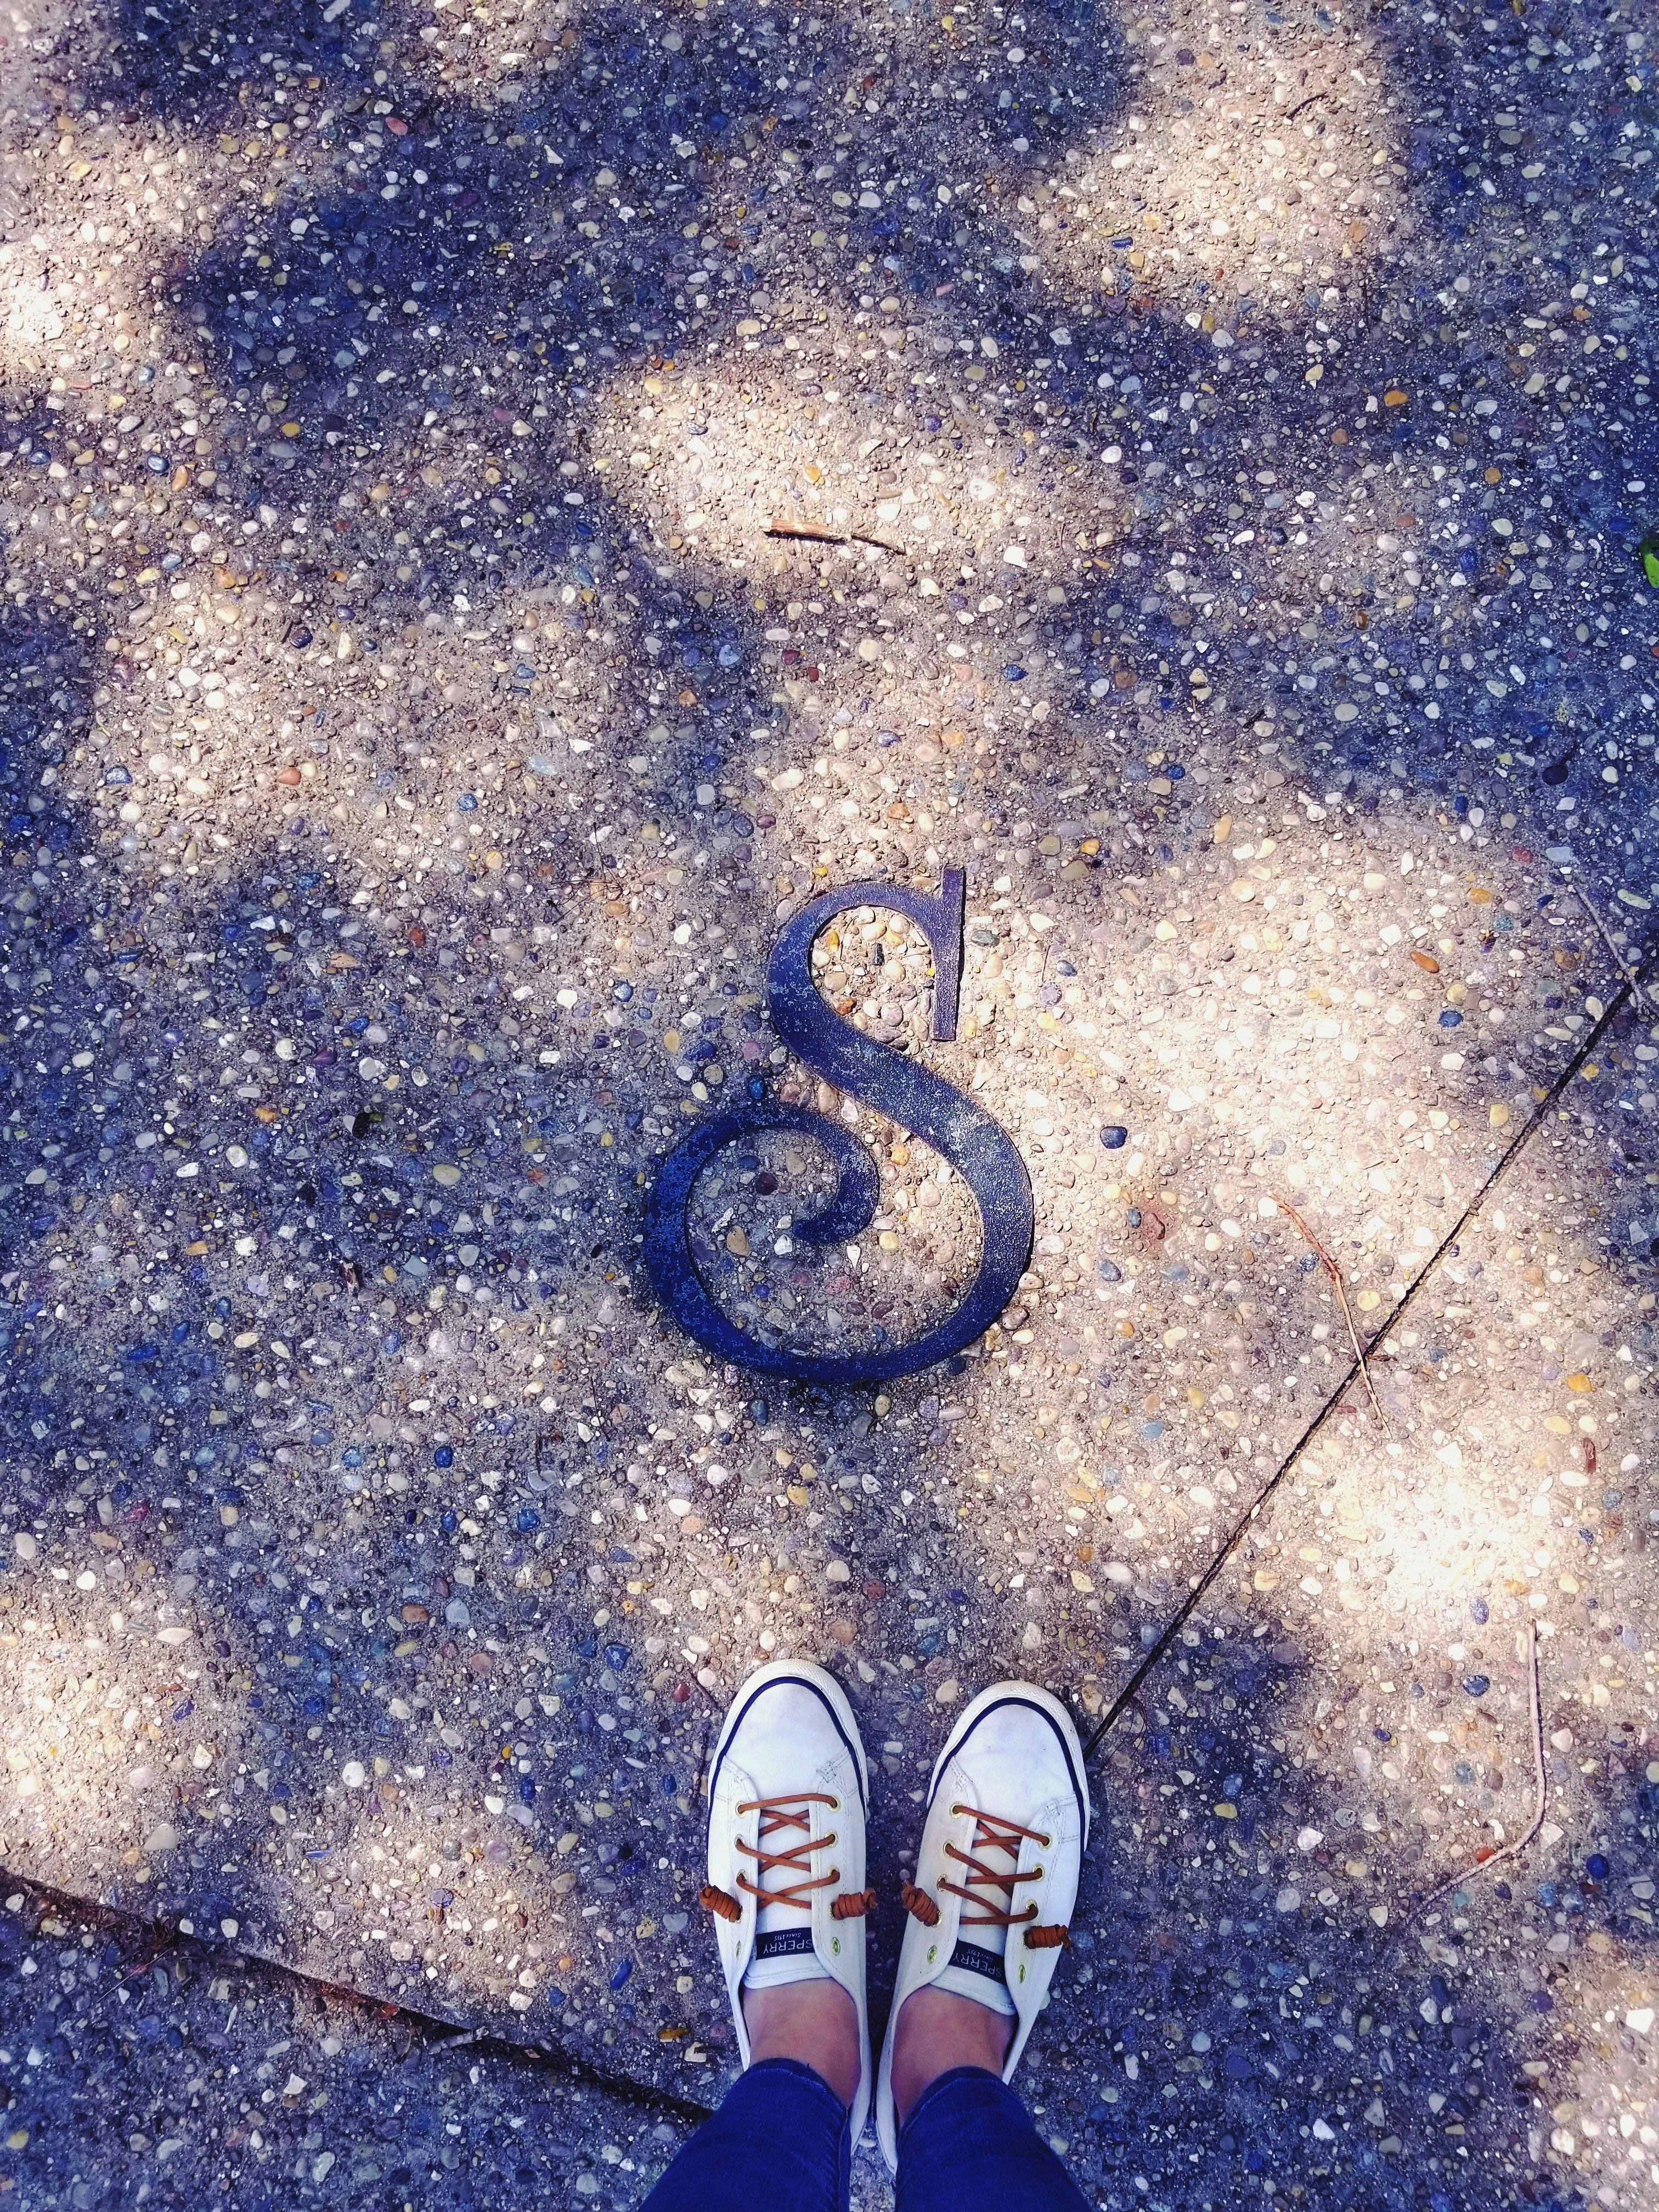 Talking a walk in a park on a beautiful holiday weekend, the light through the trees made stunning shapes on the ground. This "S" is represents a part of a ground compass to help visitors orient themselves. It was a quiet and peaceful walk through the trails that were pointed South. This is a happy place.